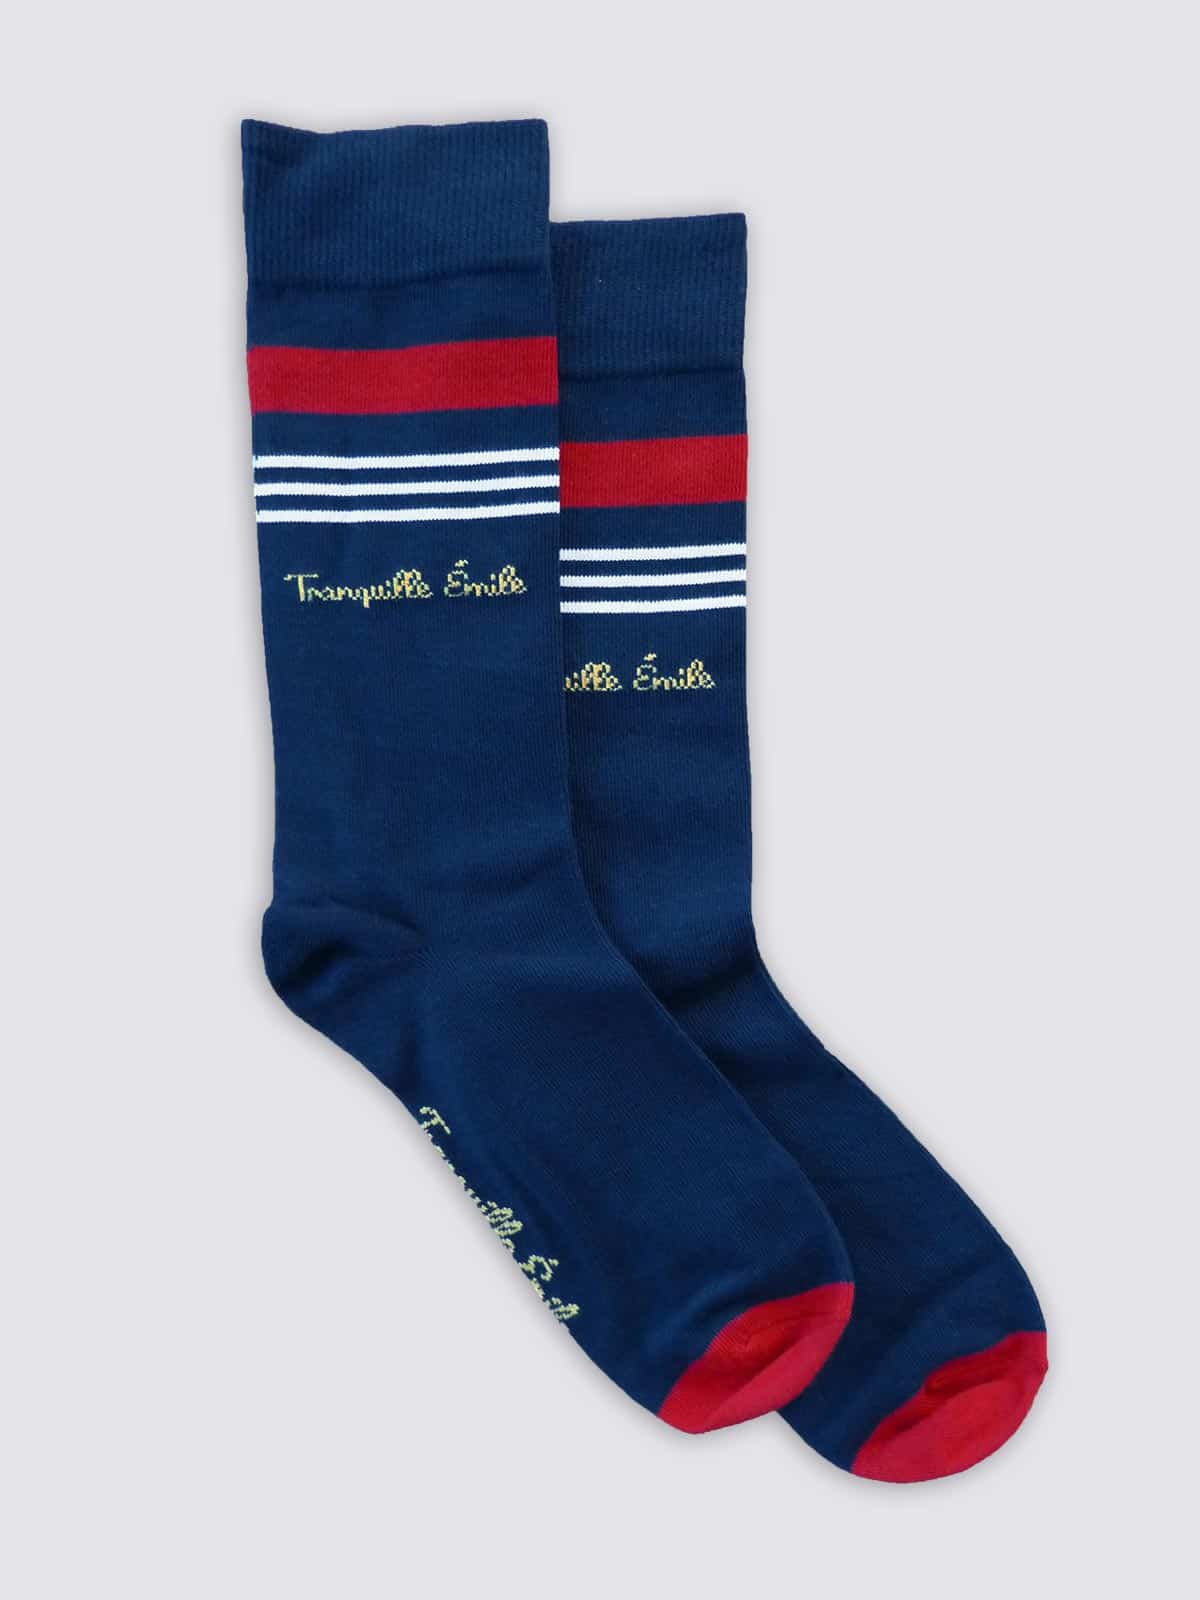 chaussettes-made-in-france-les-championnes-3